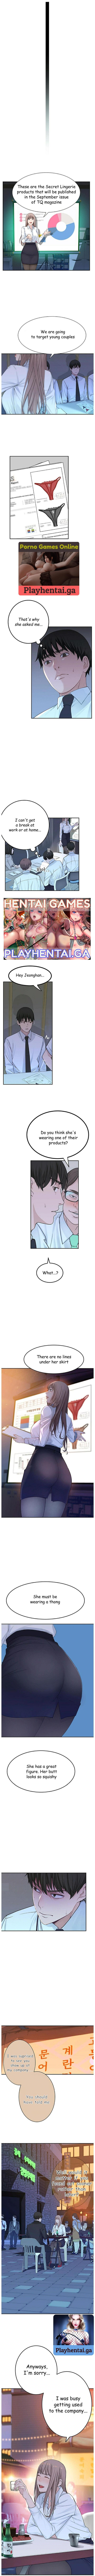 Topless 우리 사이 | BETWEEN US Ch. 3 Rimjob - Page 8